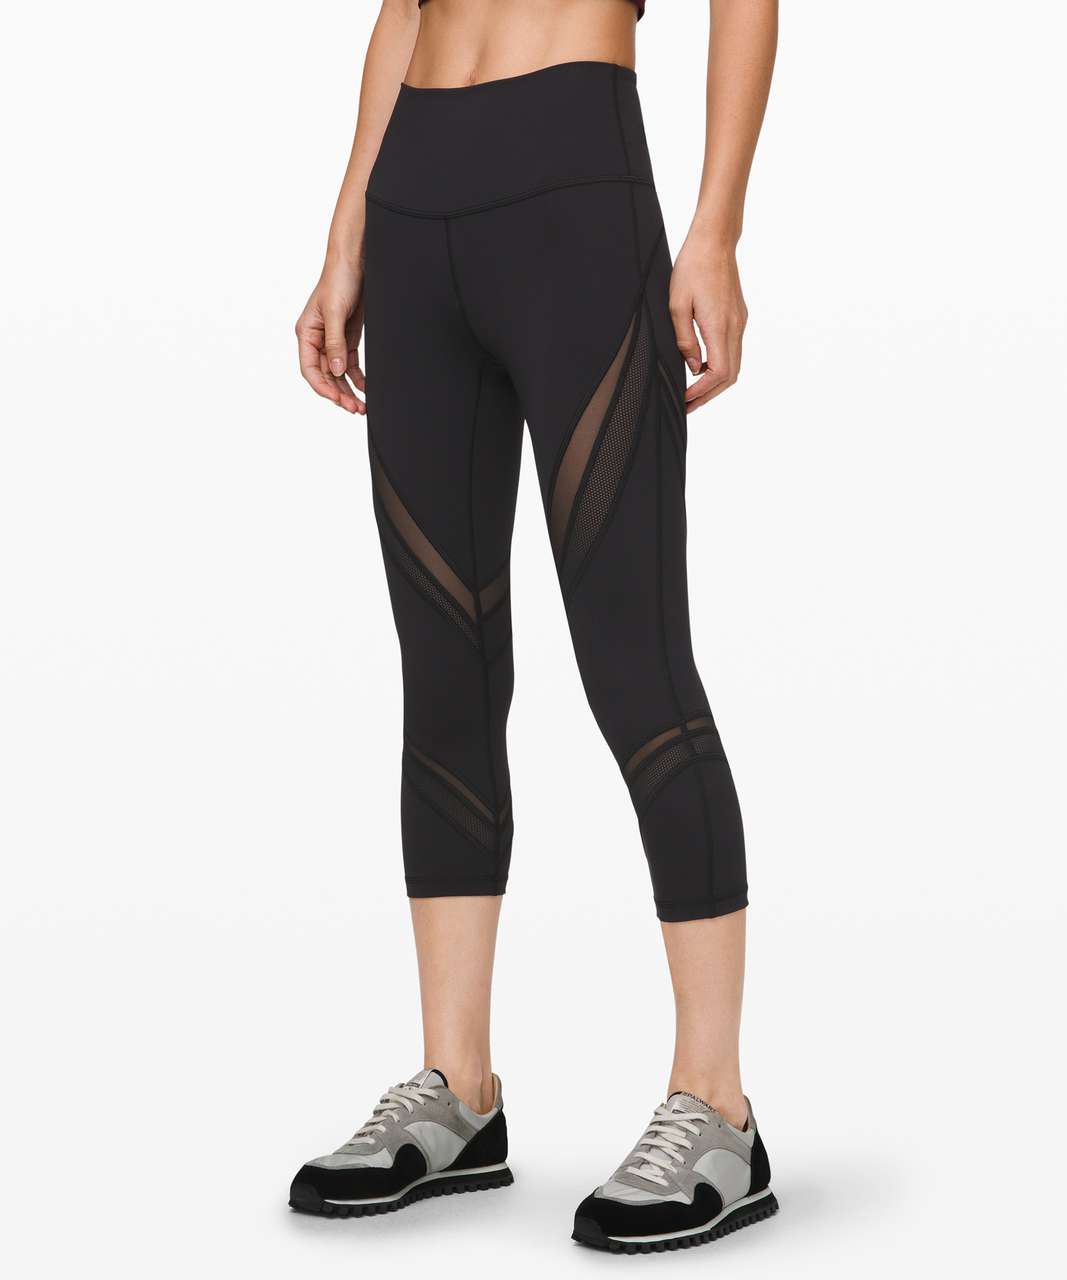 Lululemon high rise crops with see-through mesh